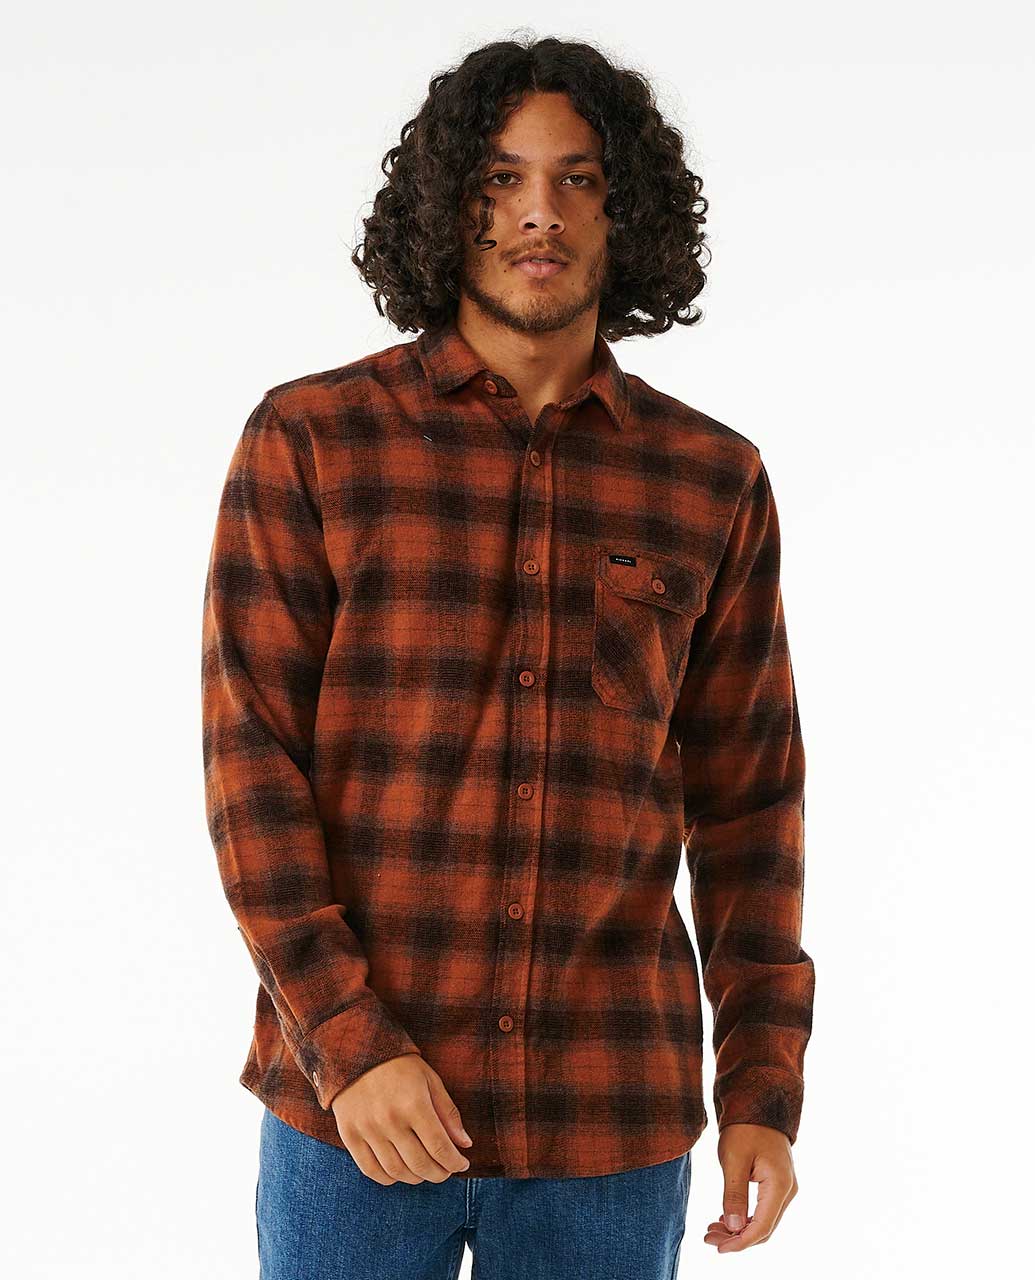 GRINNERS FLANNEL